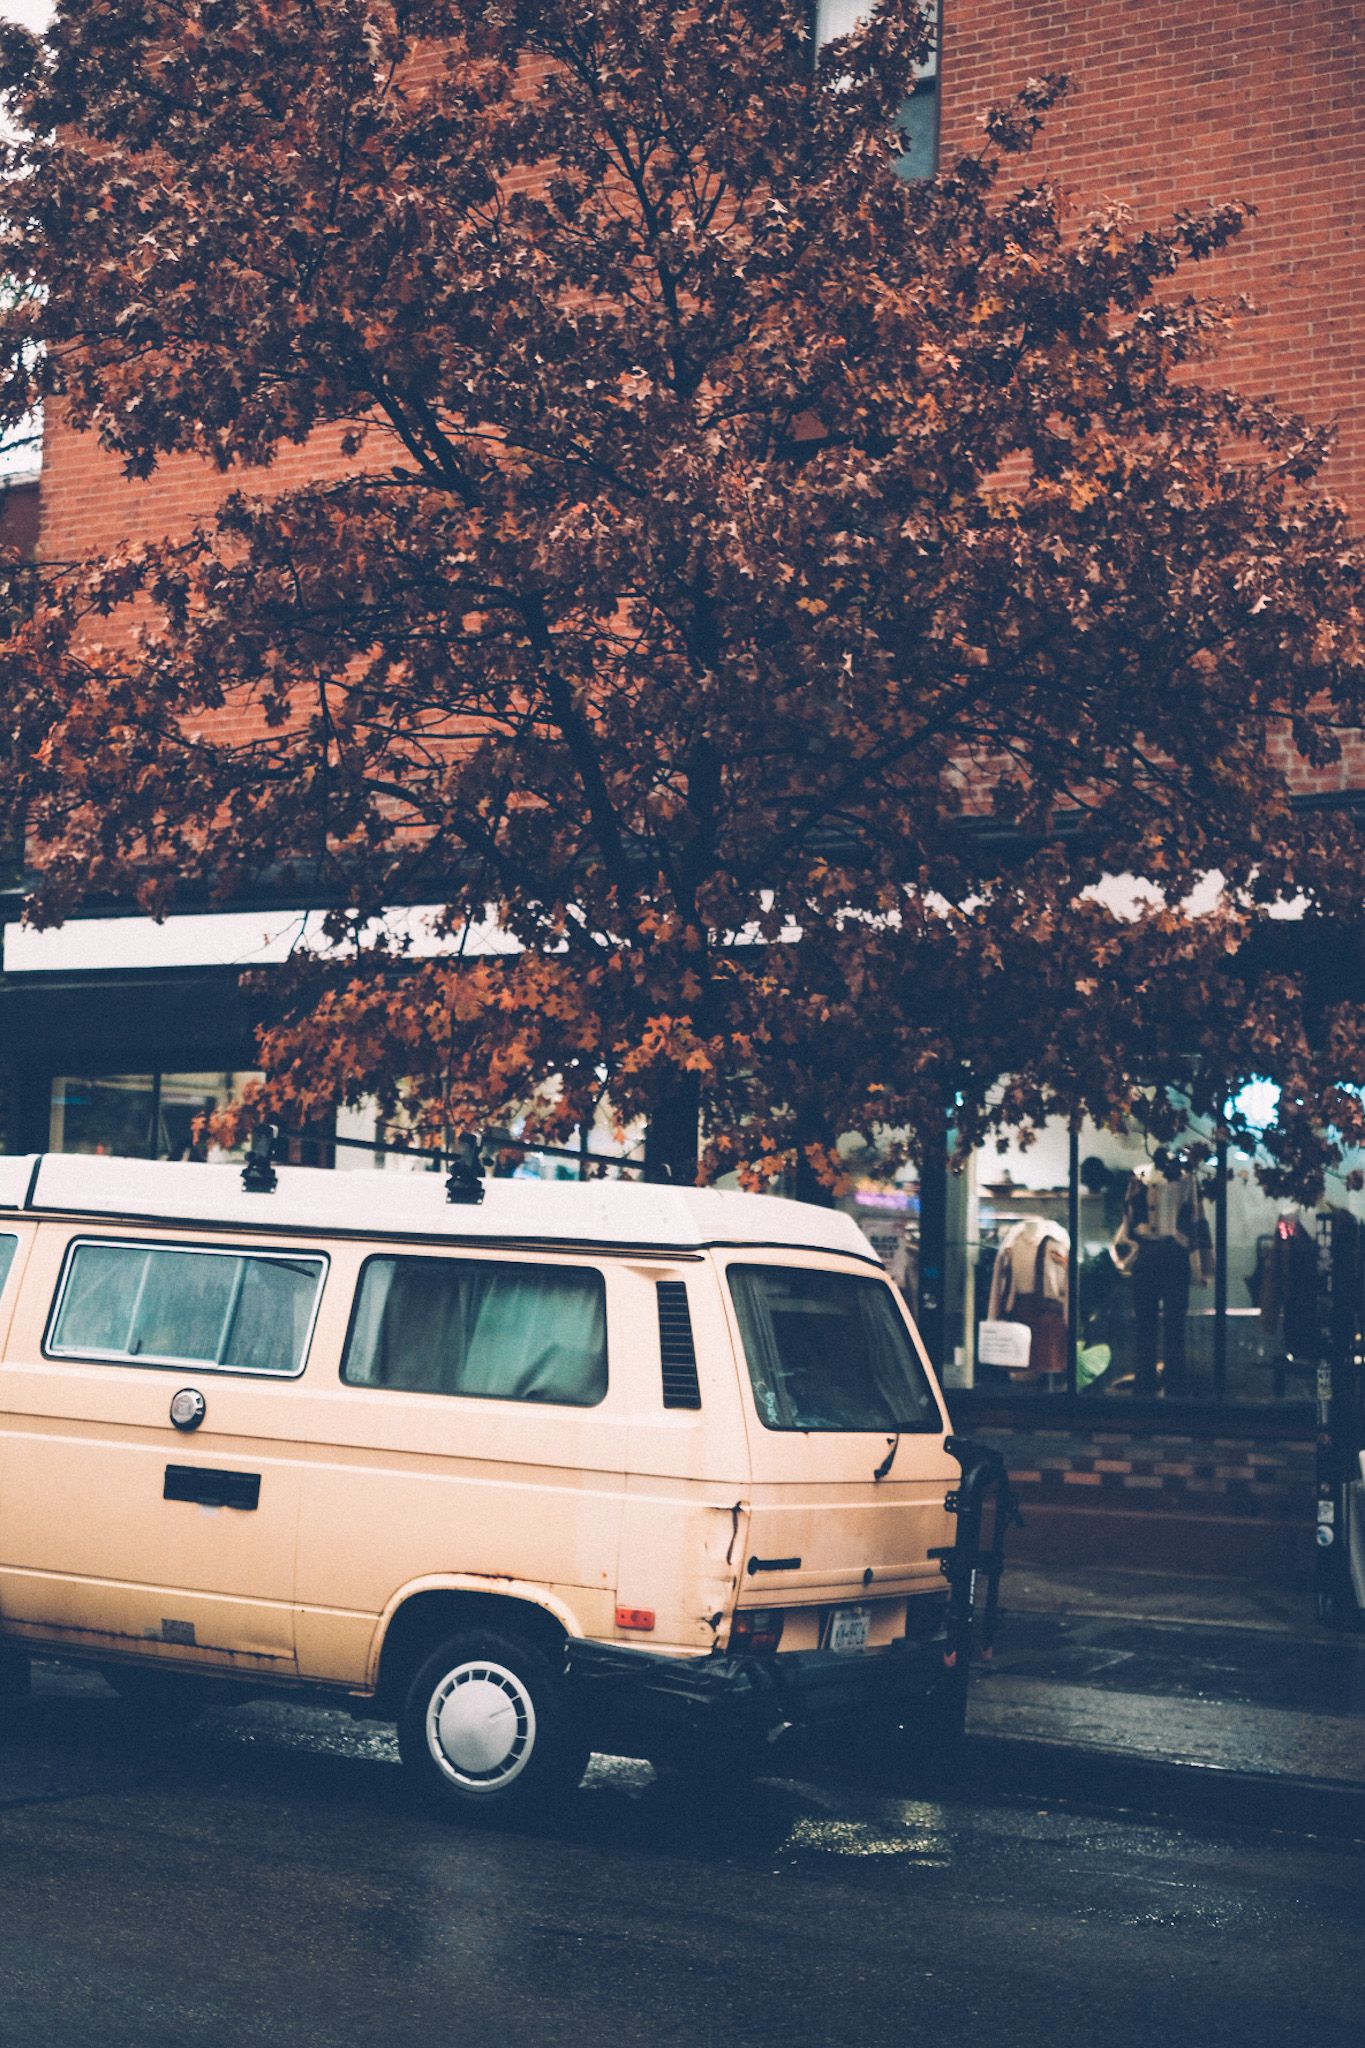 An off-white van is parked in front of a brick building and a tree with red-brown leaves, street wet from a recent rain.